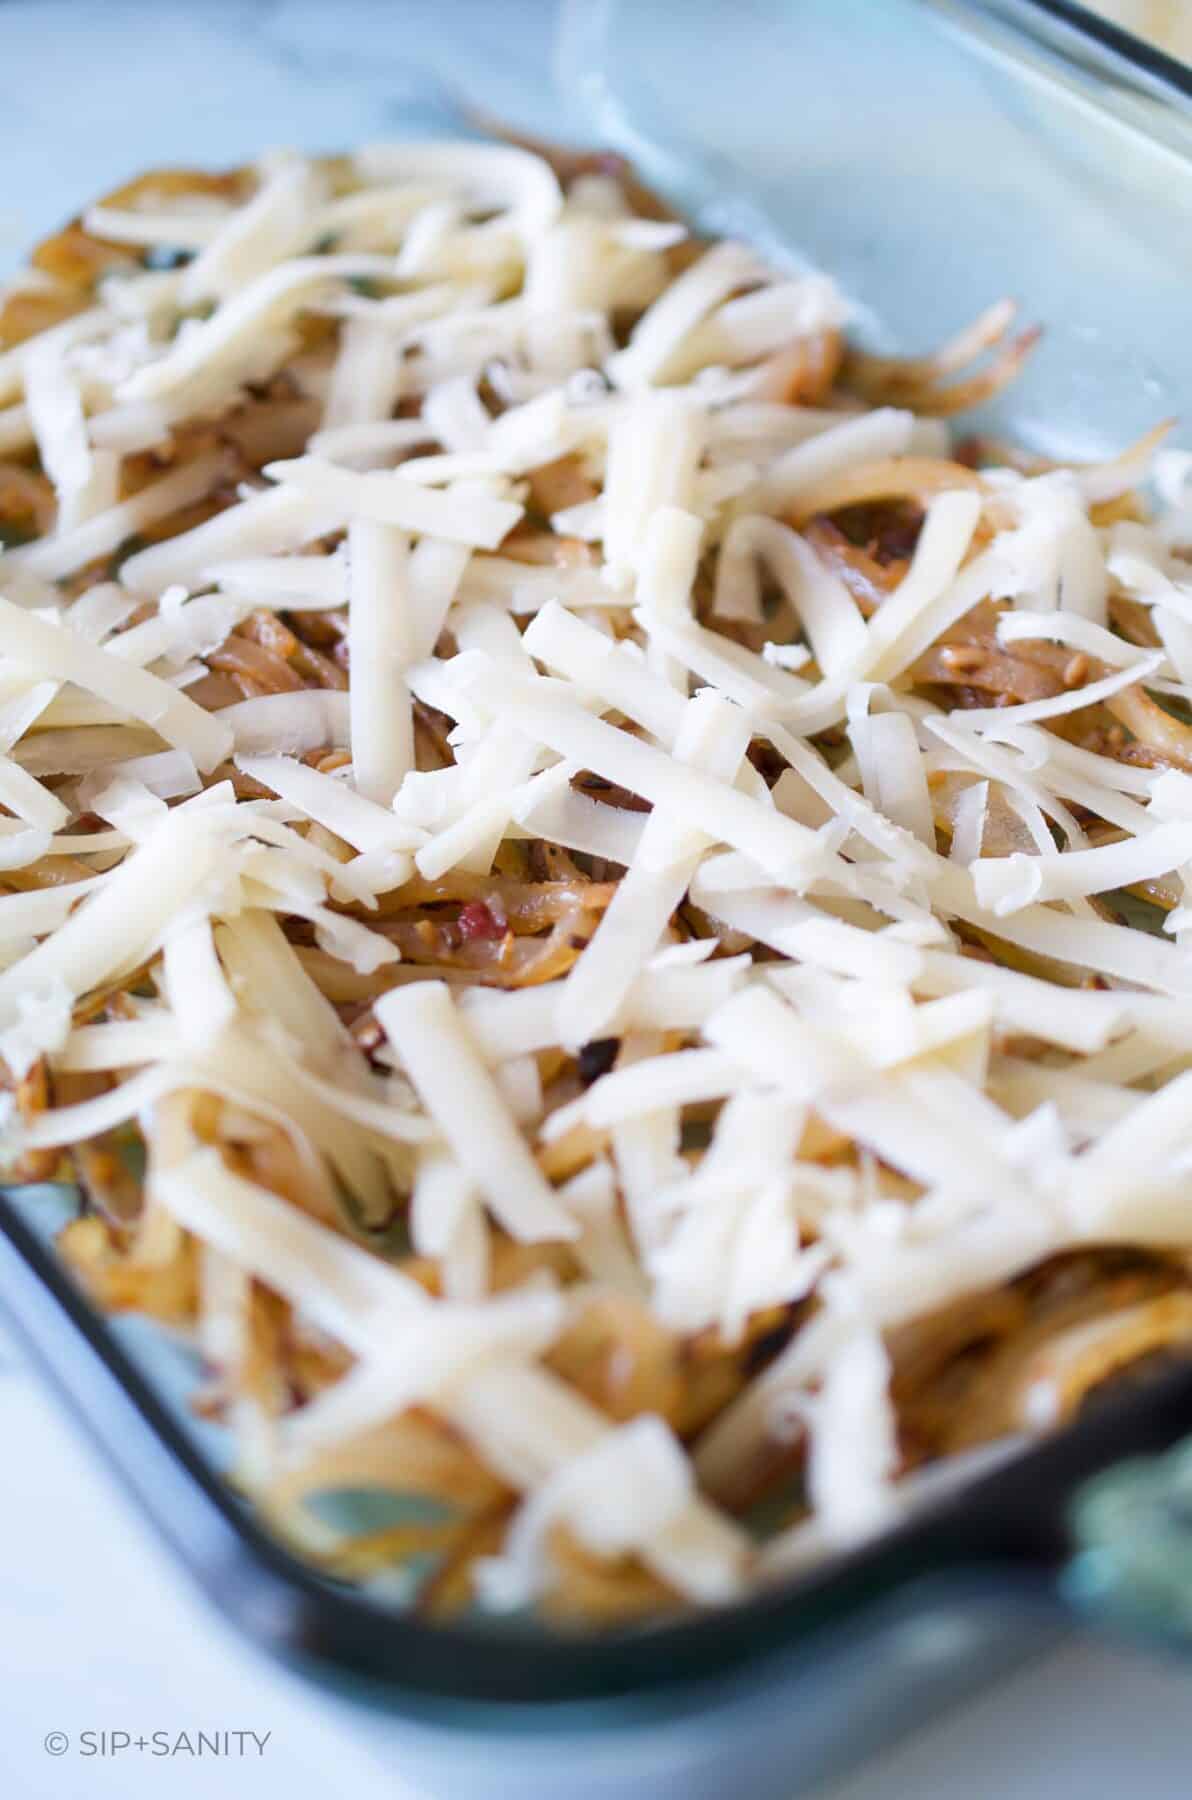 A green glass casserole dish with caramelized onions and shredded white cheese in it.